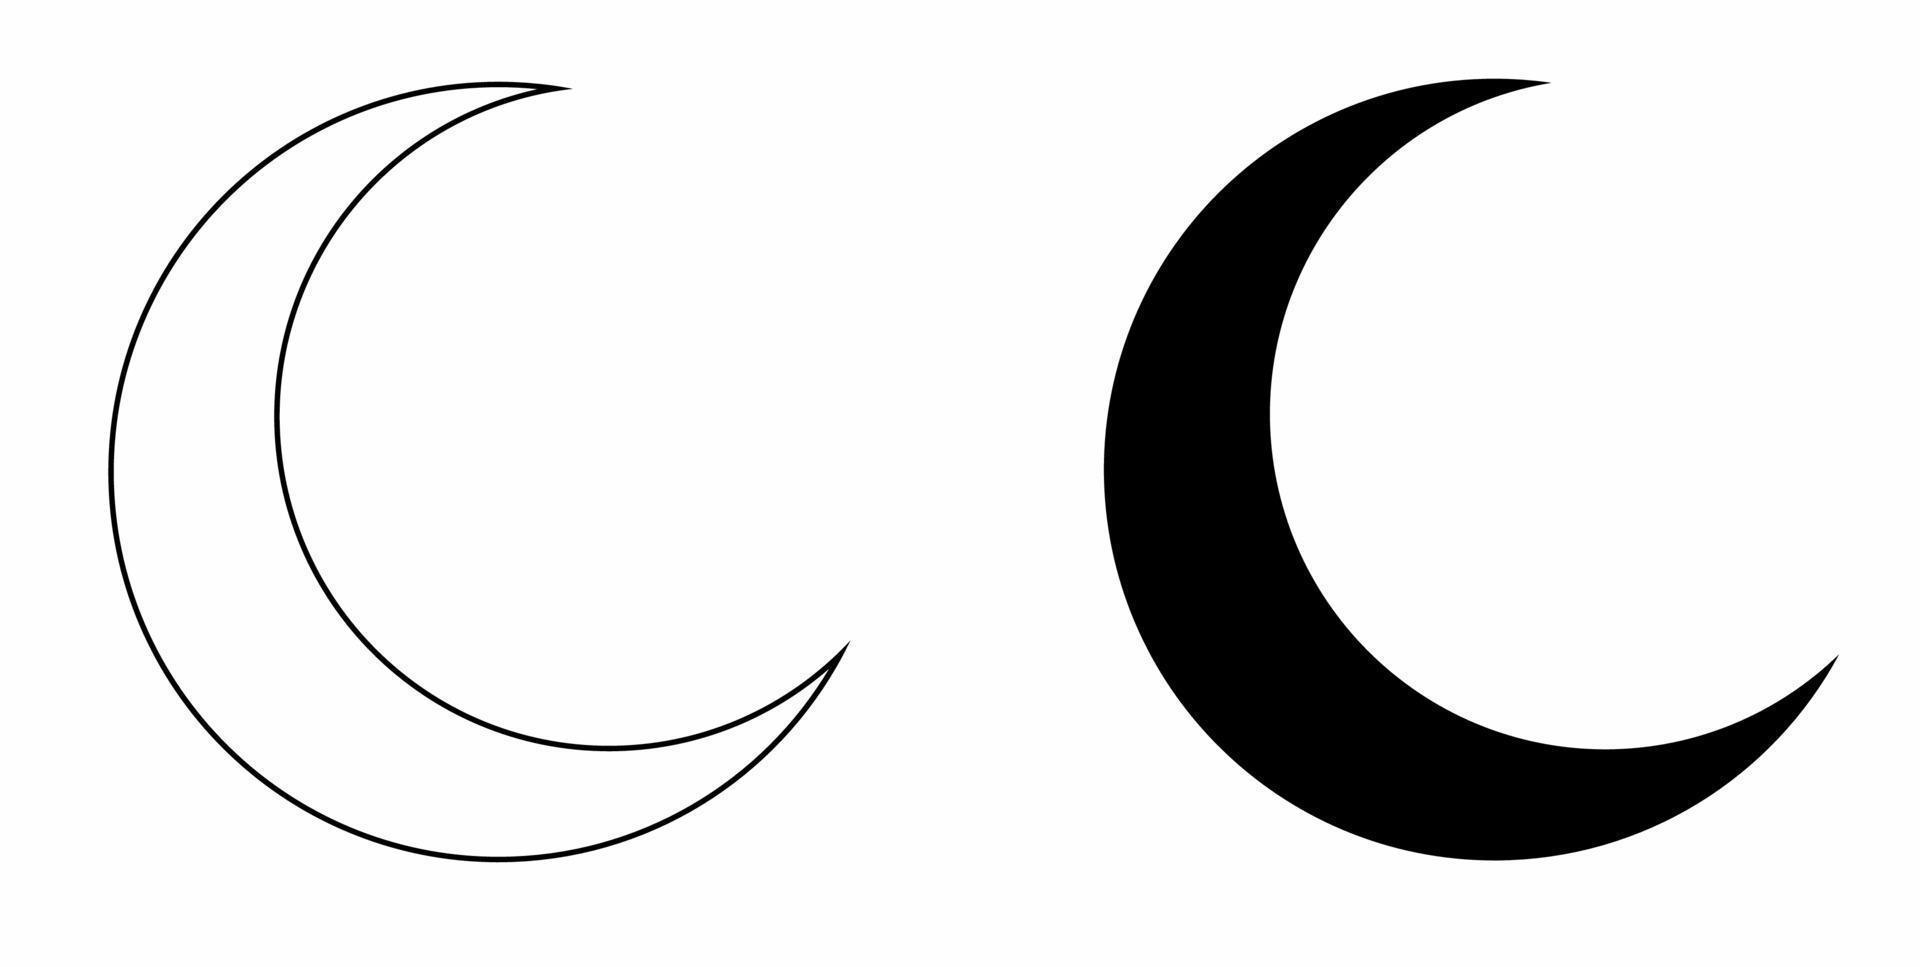 outline silhouette crescent moon icon set isolated on white background vector